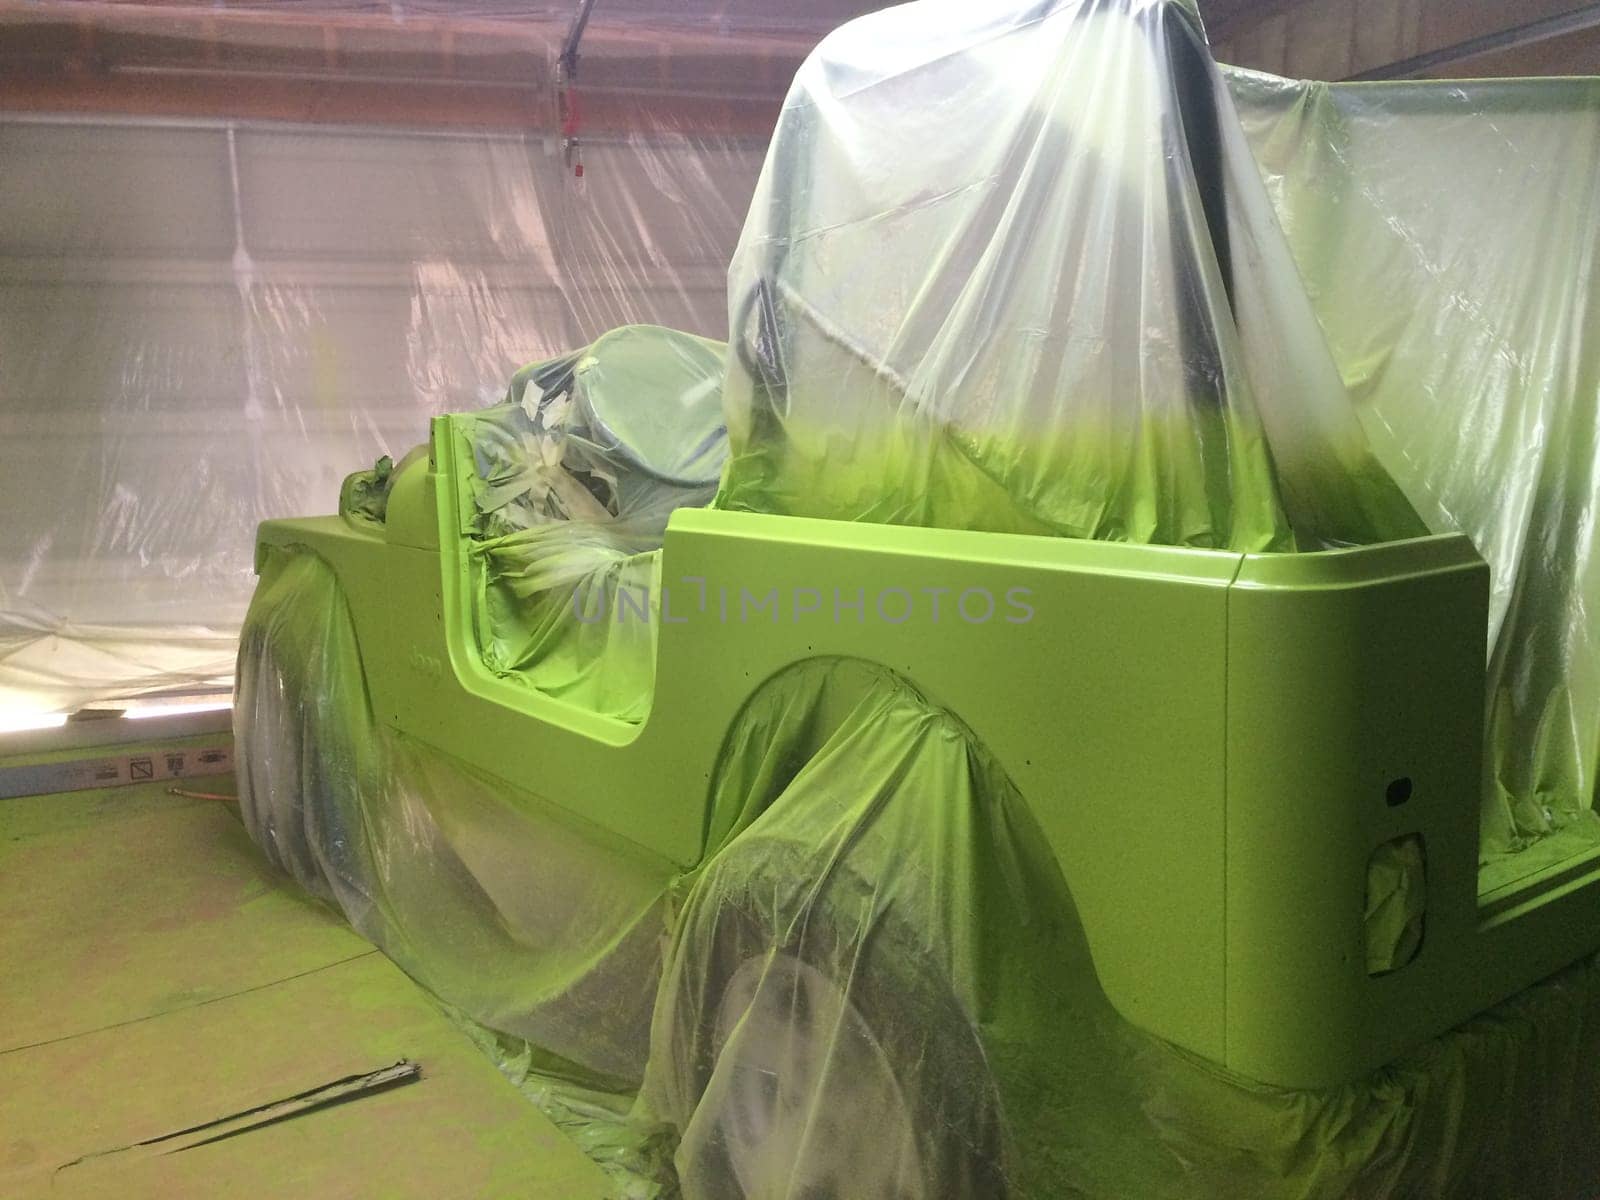 Driver Side of Vehicle, Lime Green Paint Job, 1990s SUV by grumblytumbleweed